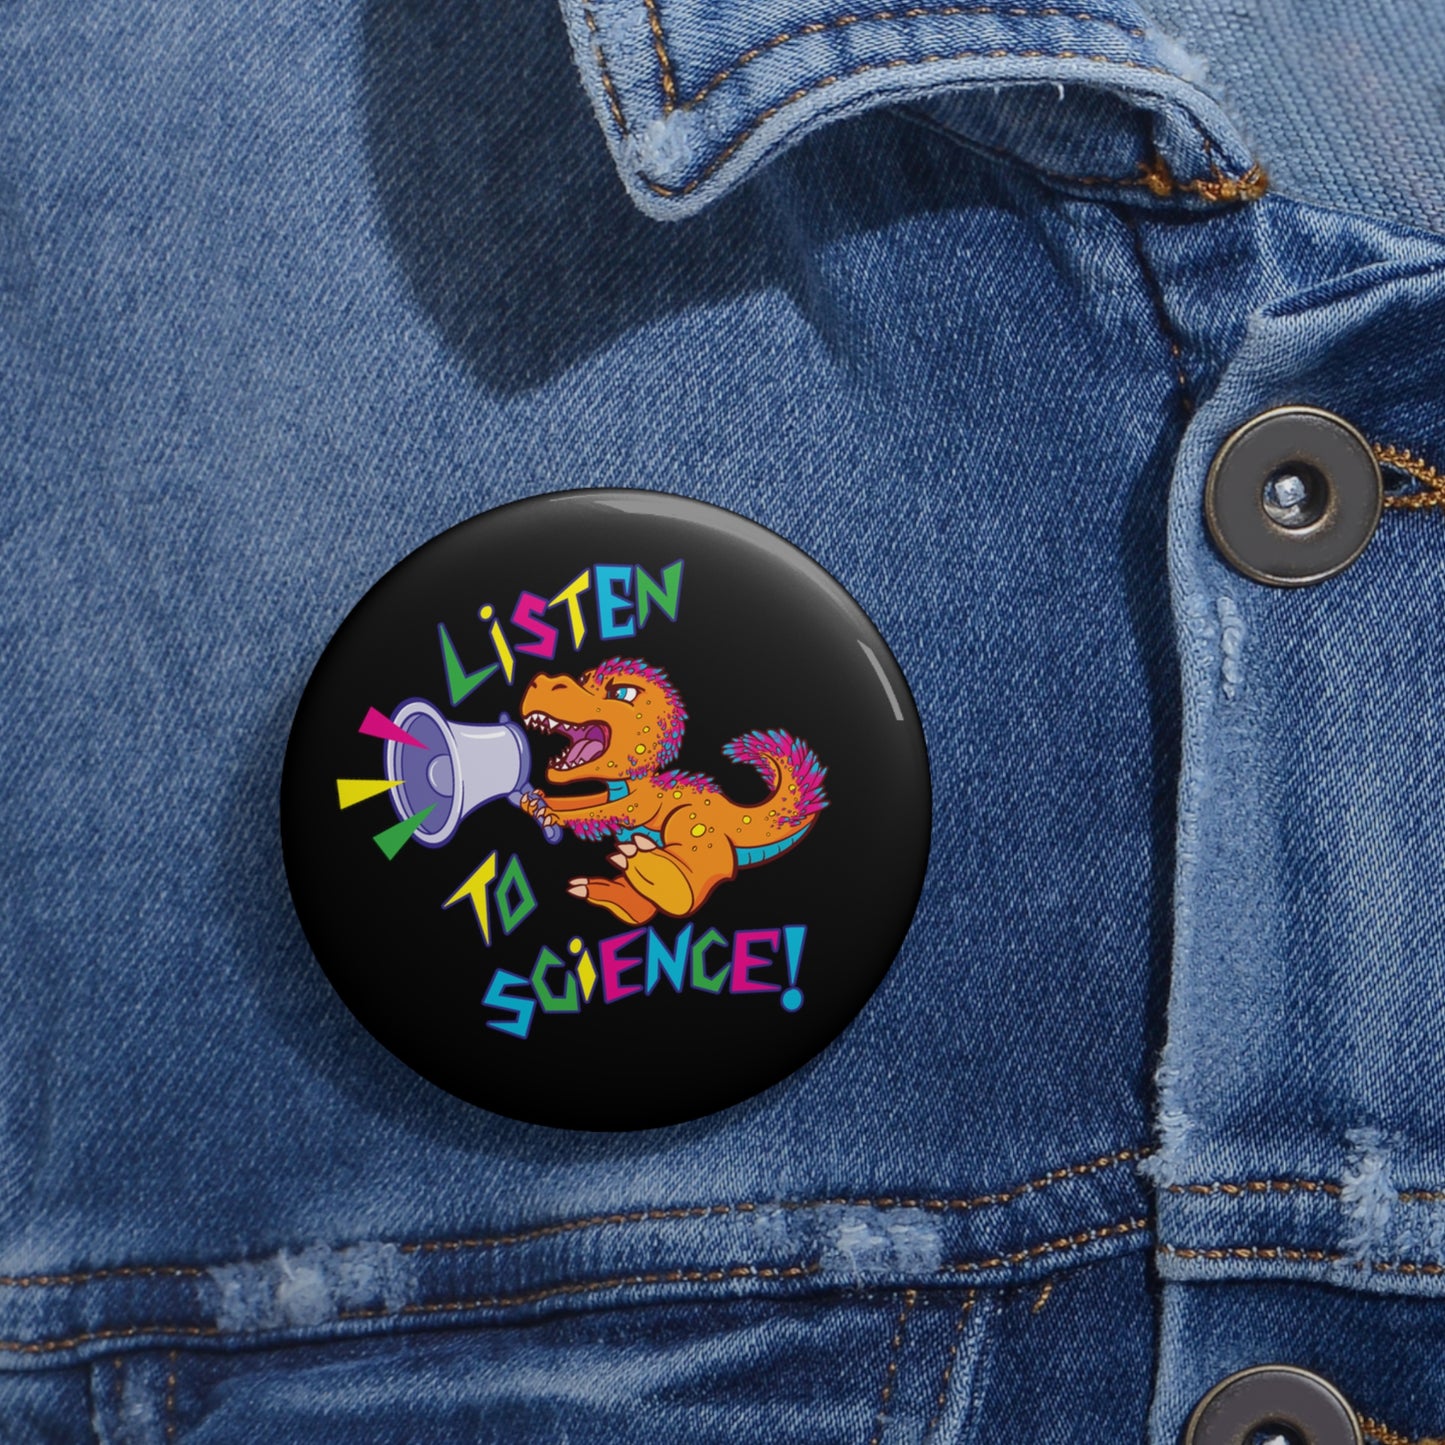 "Science!" Pin Buttons